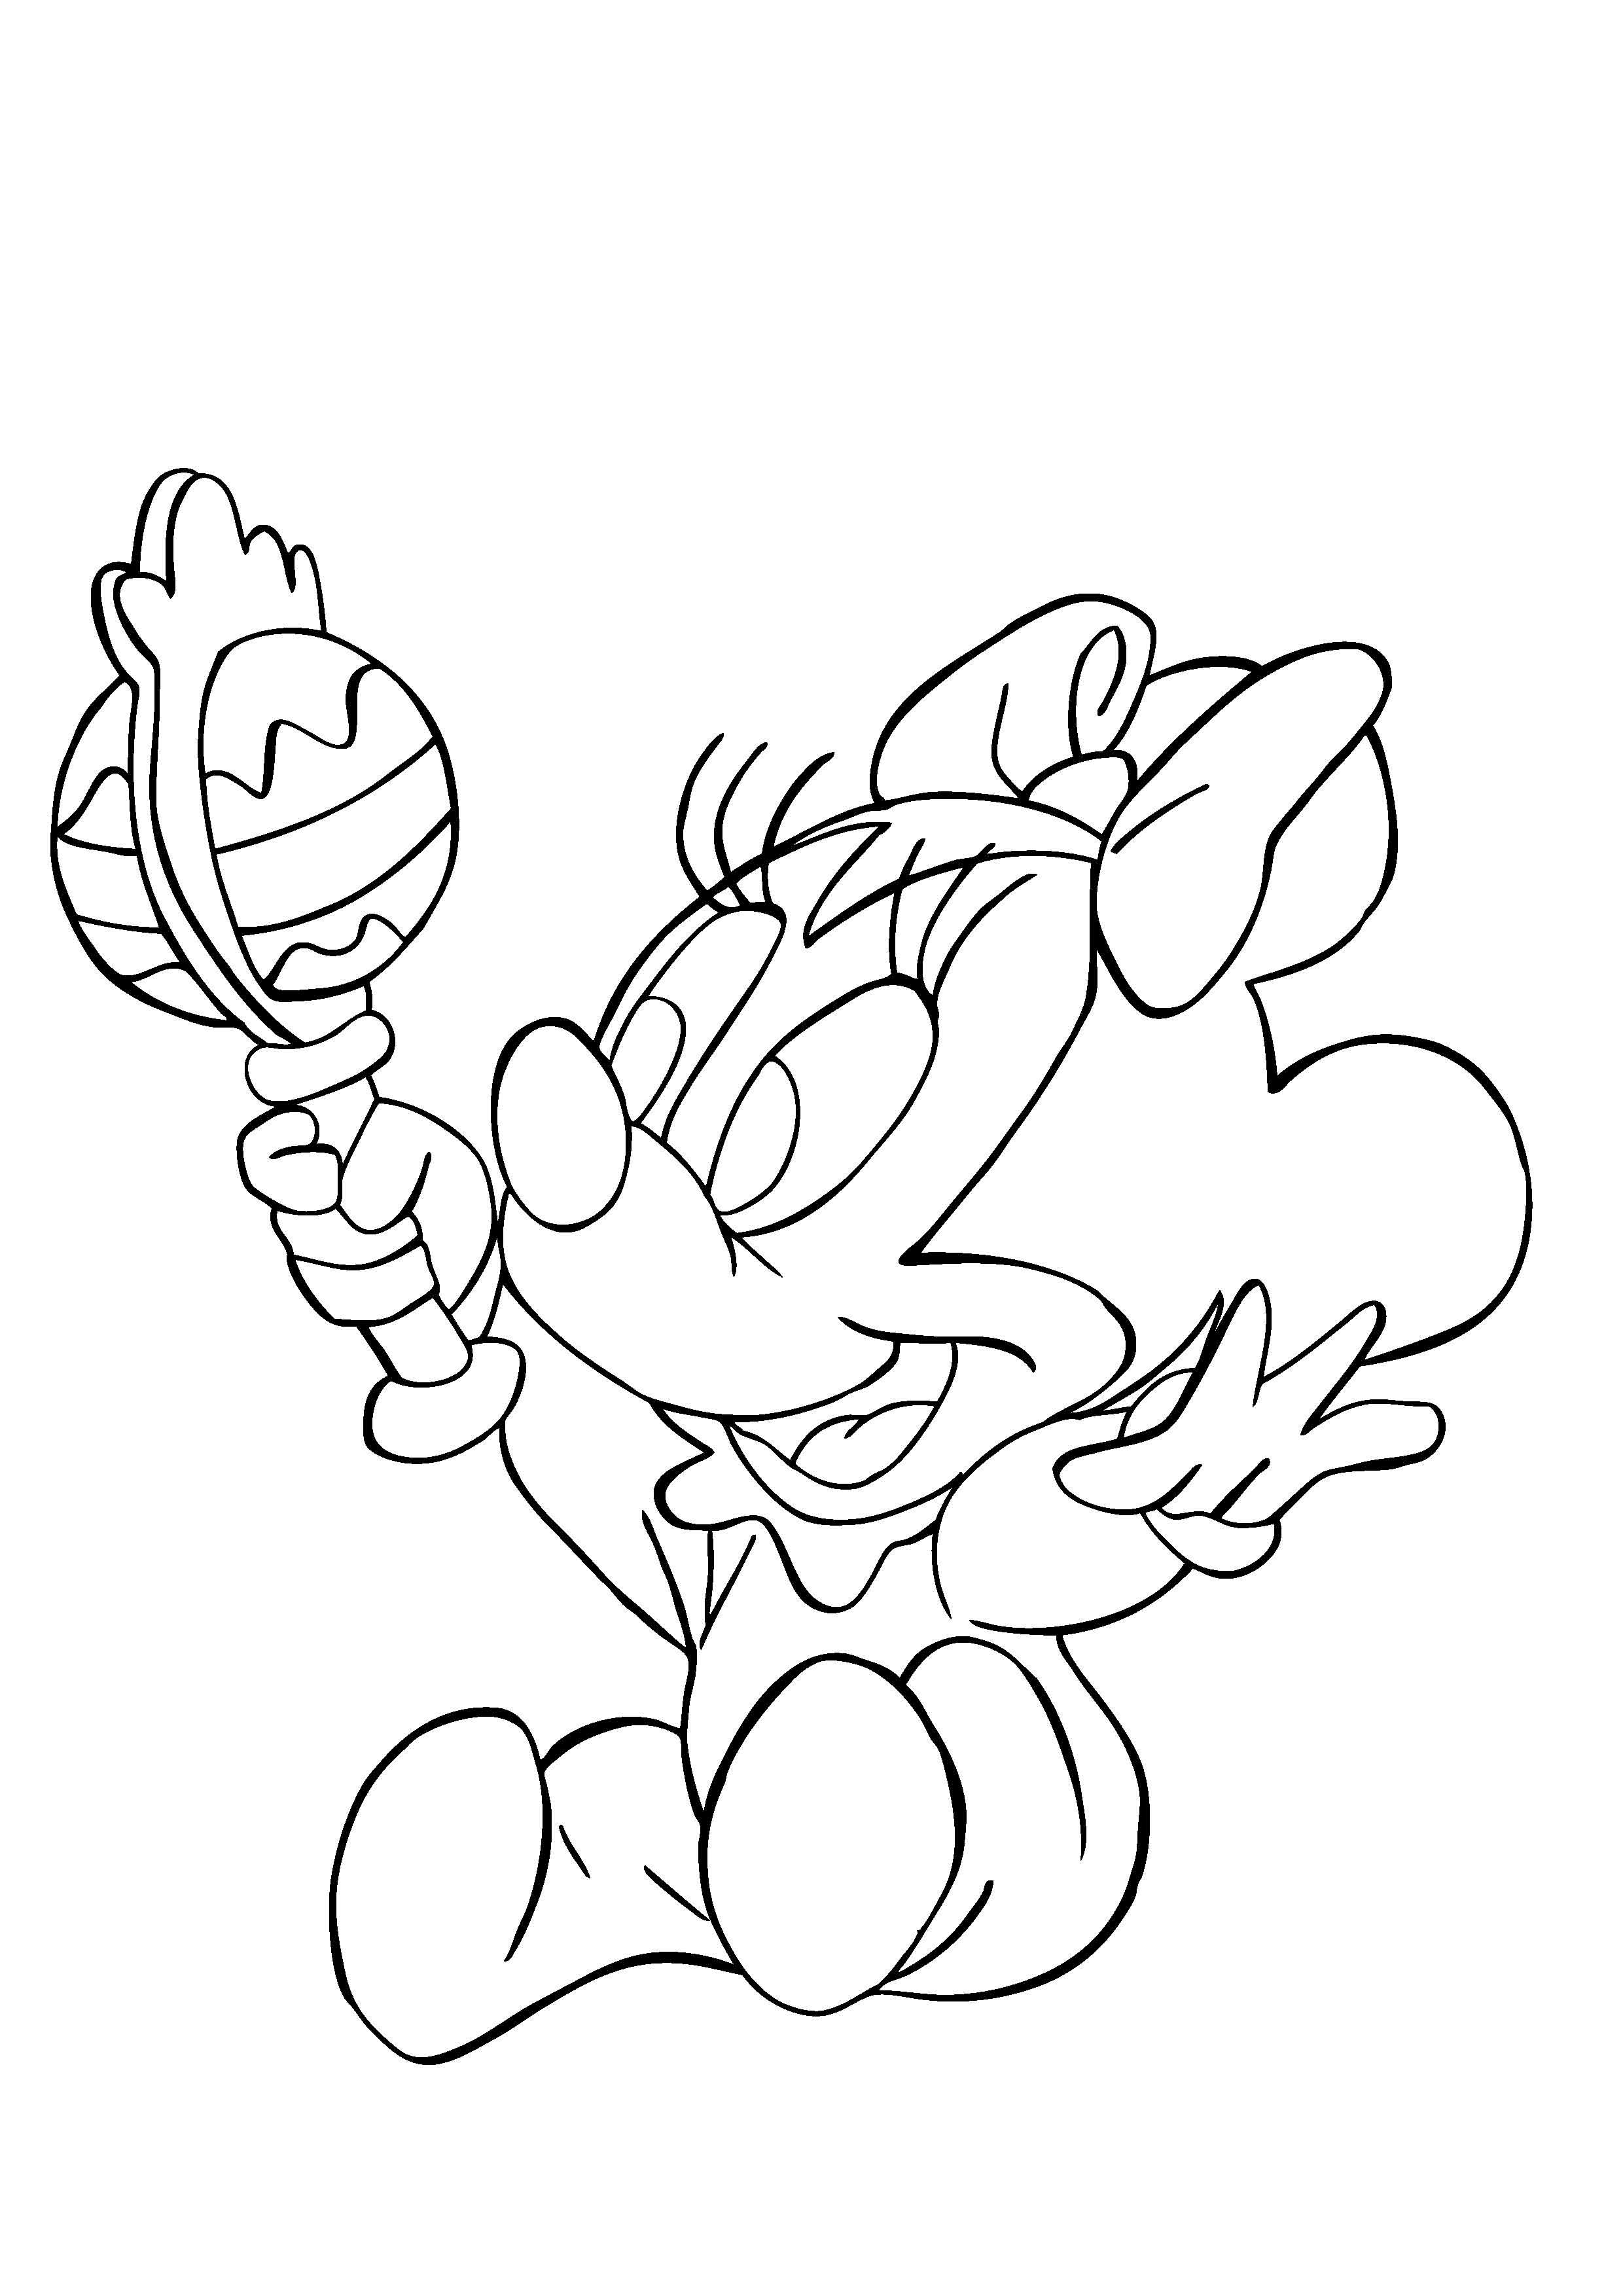 minnie mouse as a baby Colouring Pages